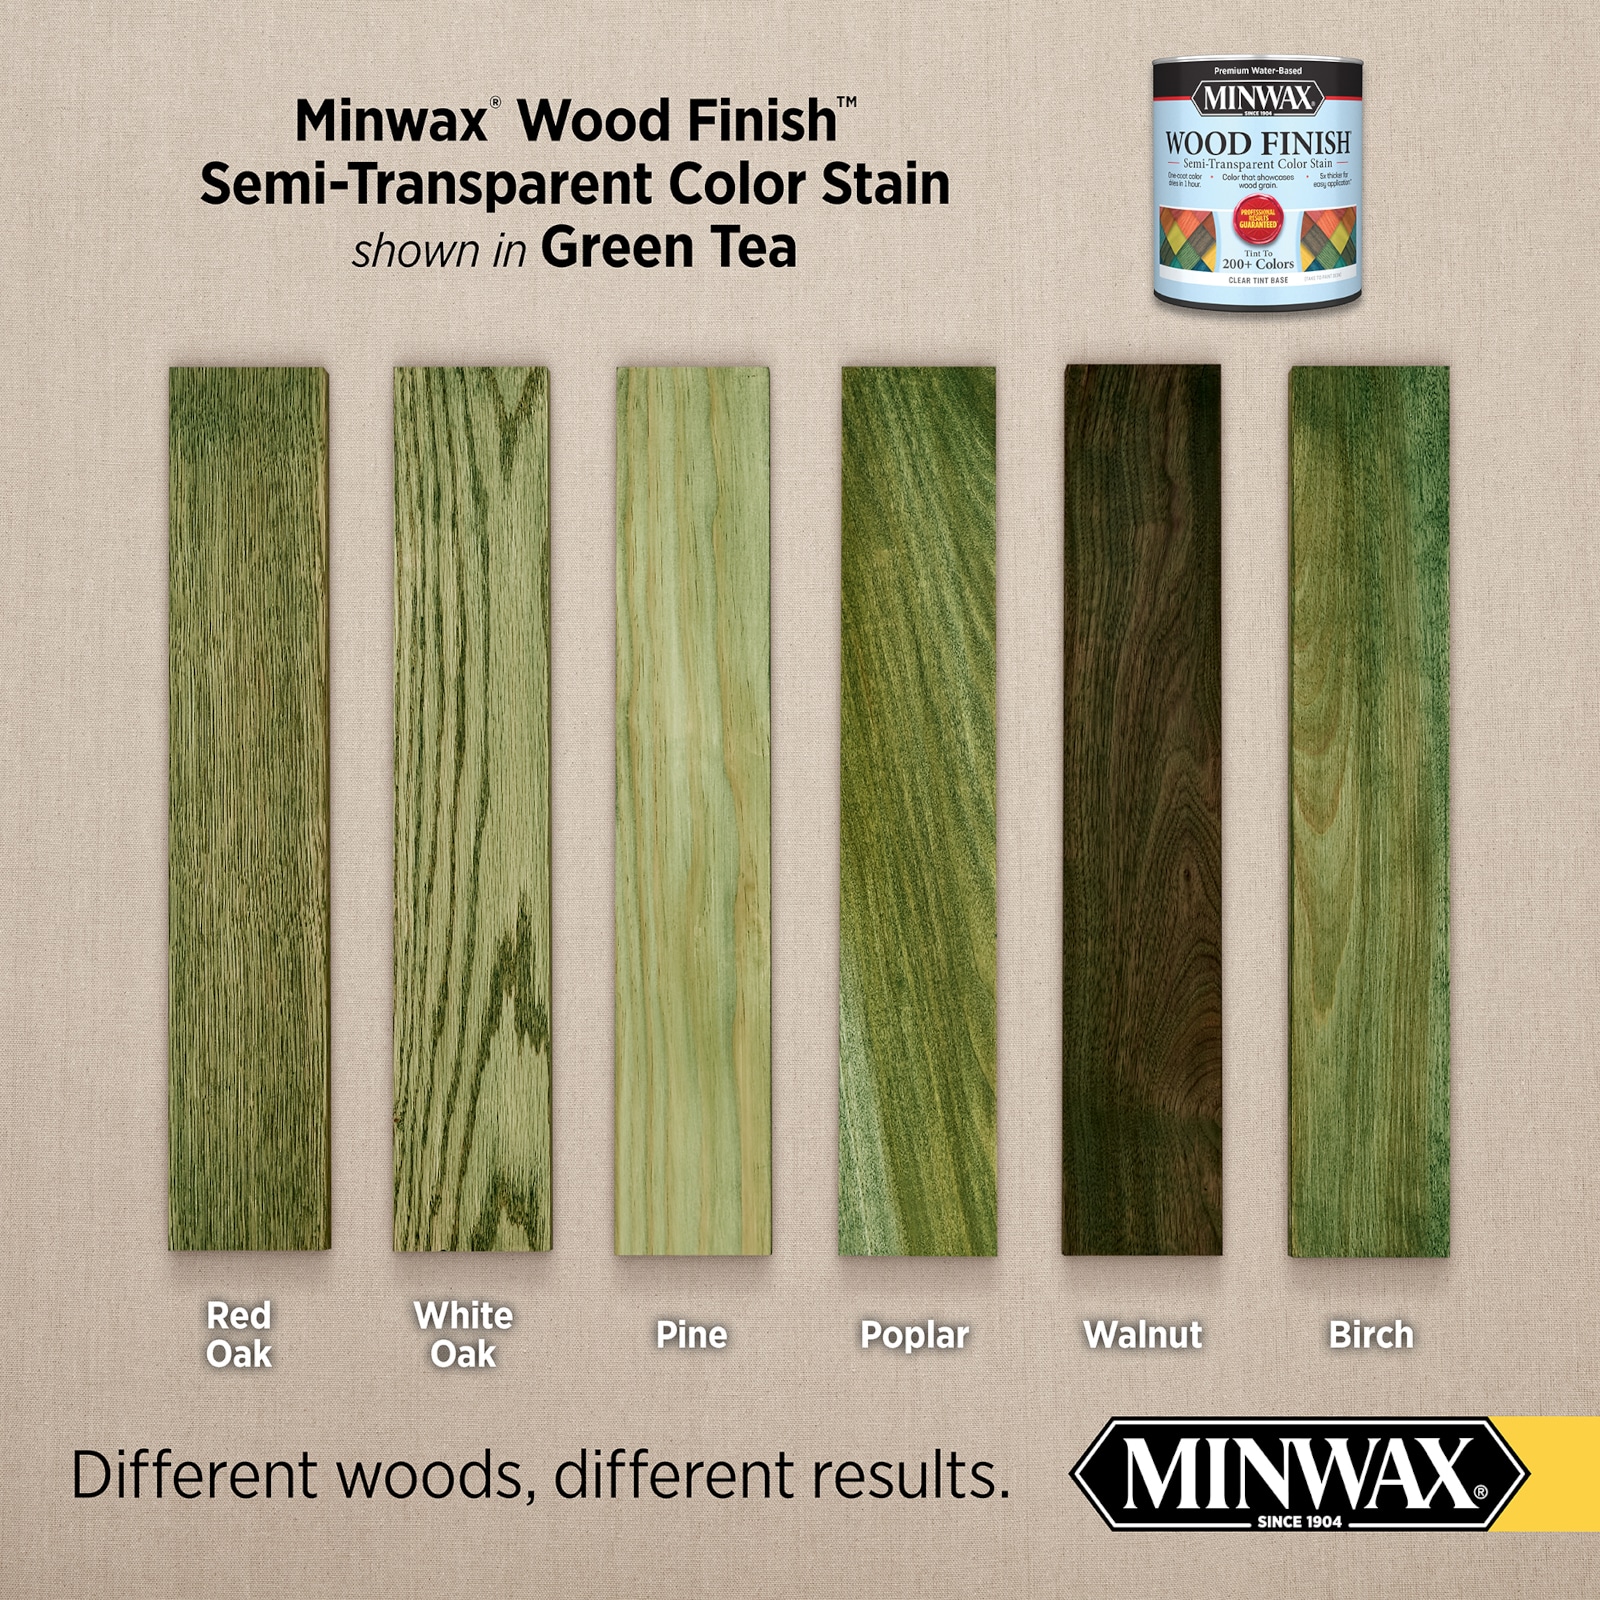 Minwax Wood Finish Water-Based Green Tea Mw1027 Solid Interior Stain  (1-Quart) in the Interior Stains department at